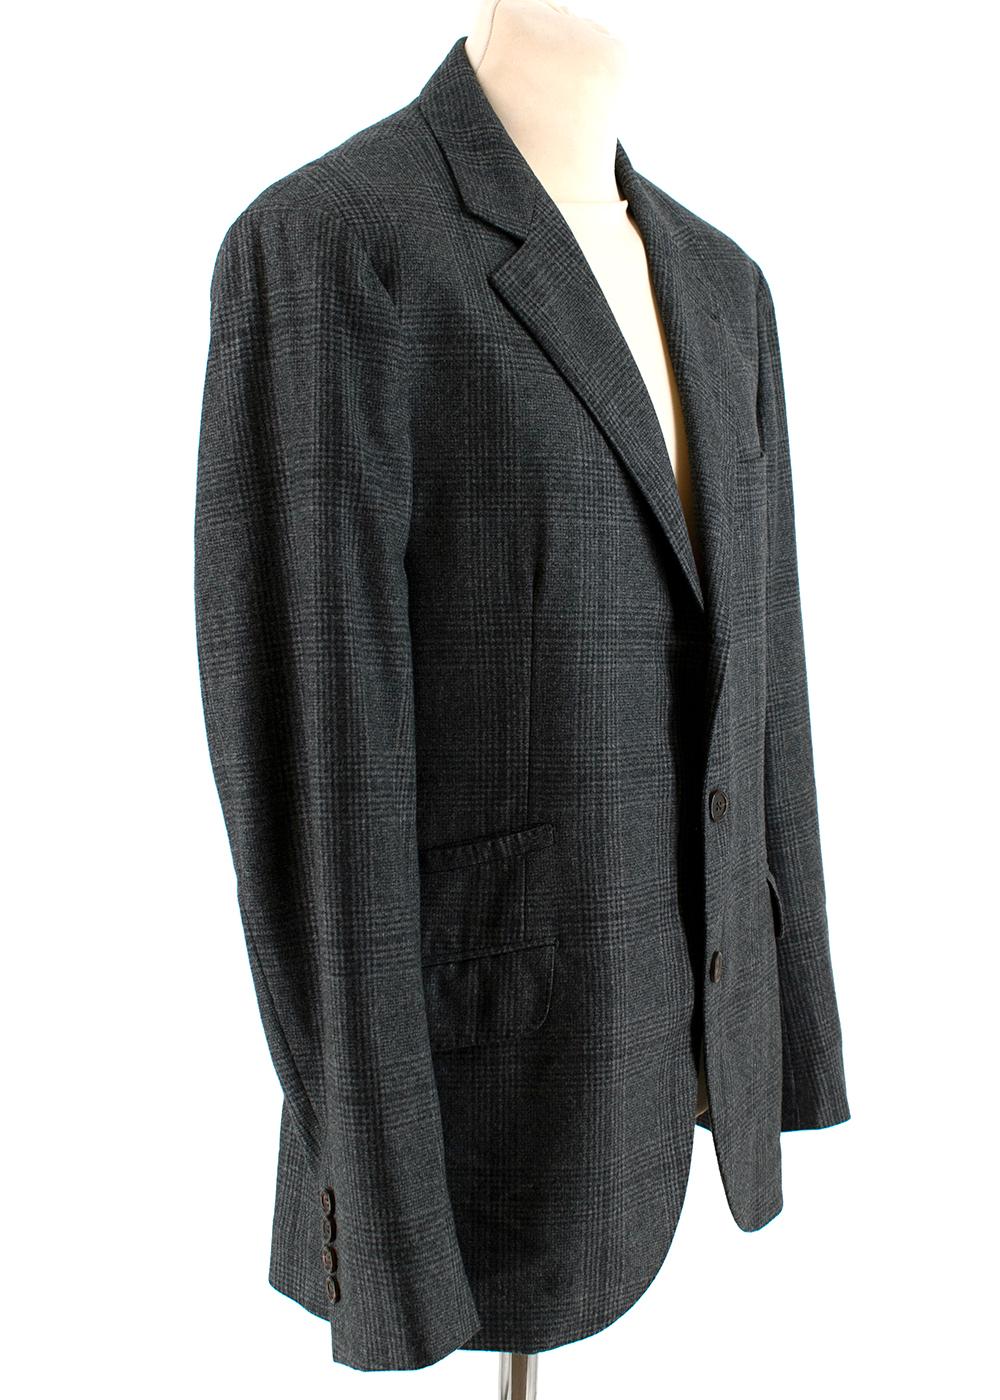 Brunello Cucinelli Mens Woven Blazer

- Tailored jacket with a woven mix of wool, cashmere and silk.

- Featuring a revere collar and pencil pockets, semi-lined in brown silk

-Slip pocket on the chest

- Fastened with 3 button

-Notch lapels,